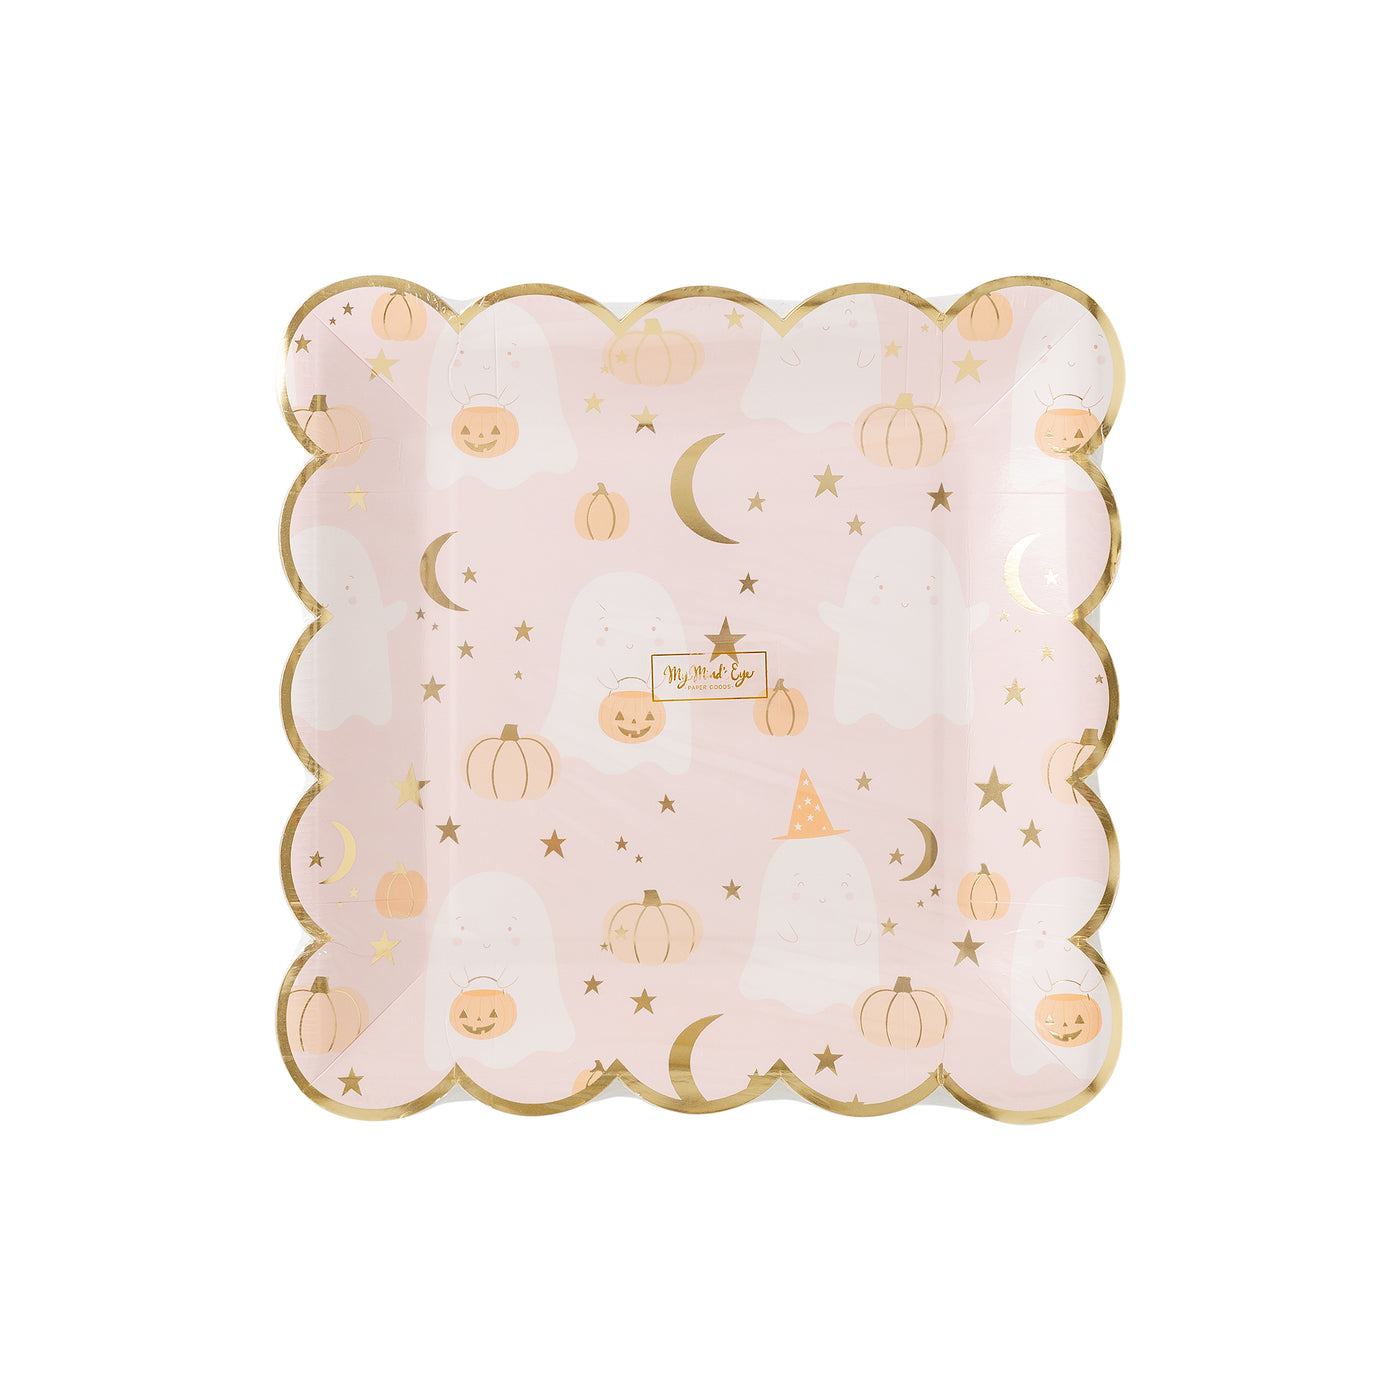 GHL1141 - Occasions by Shakira - Ghost Scatter Plate